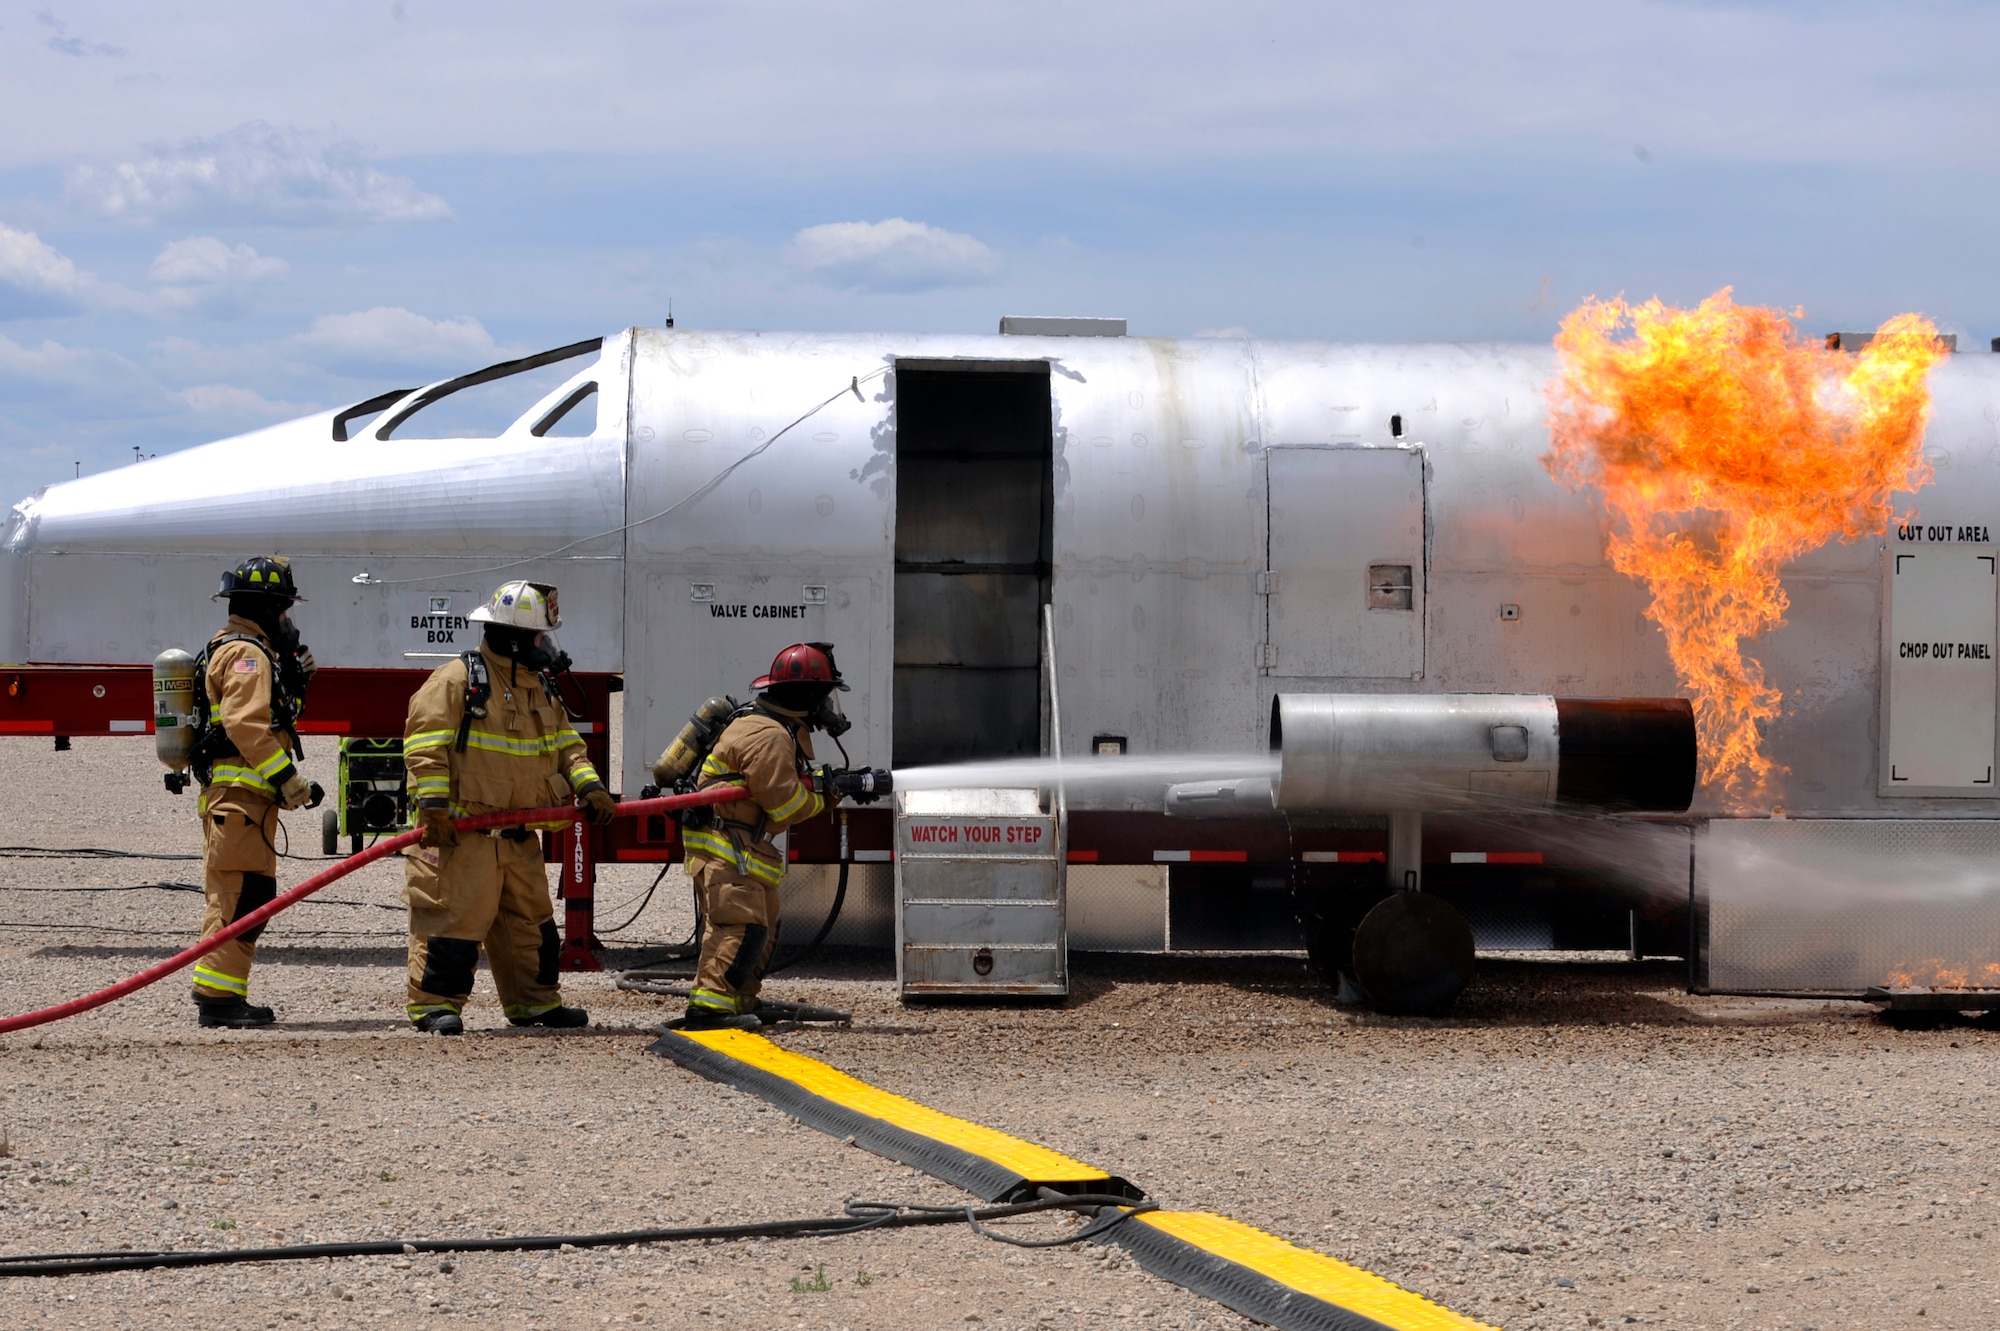 BUCKLEY AIR FORCE BASE, Colo. – Buckley firefighters perform live-fire training on a mobile air fire trainer here May 30, 2012. The new MAFT unit will be used by Buckley, F.E. Warren AFB and local civilian fire departments to meet live-fire training requirements. (U.S. Air Force photo by Airman 1st Class Riley Johnson)